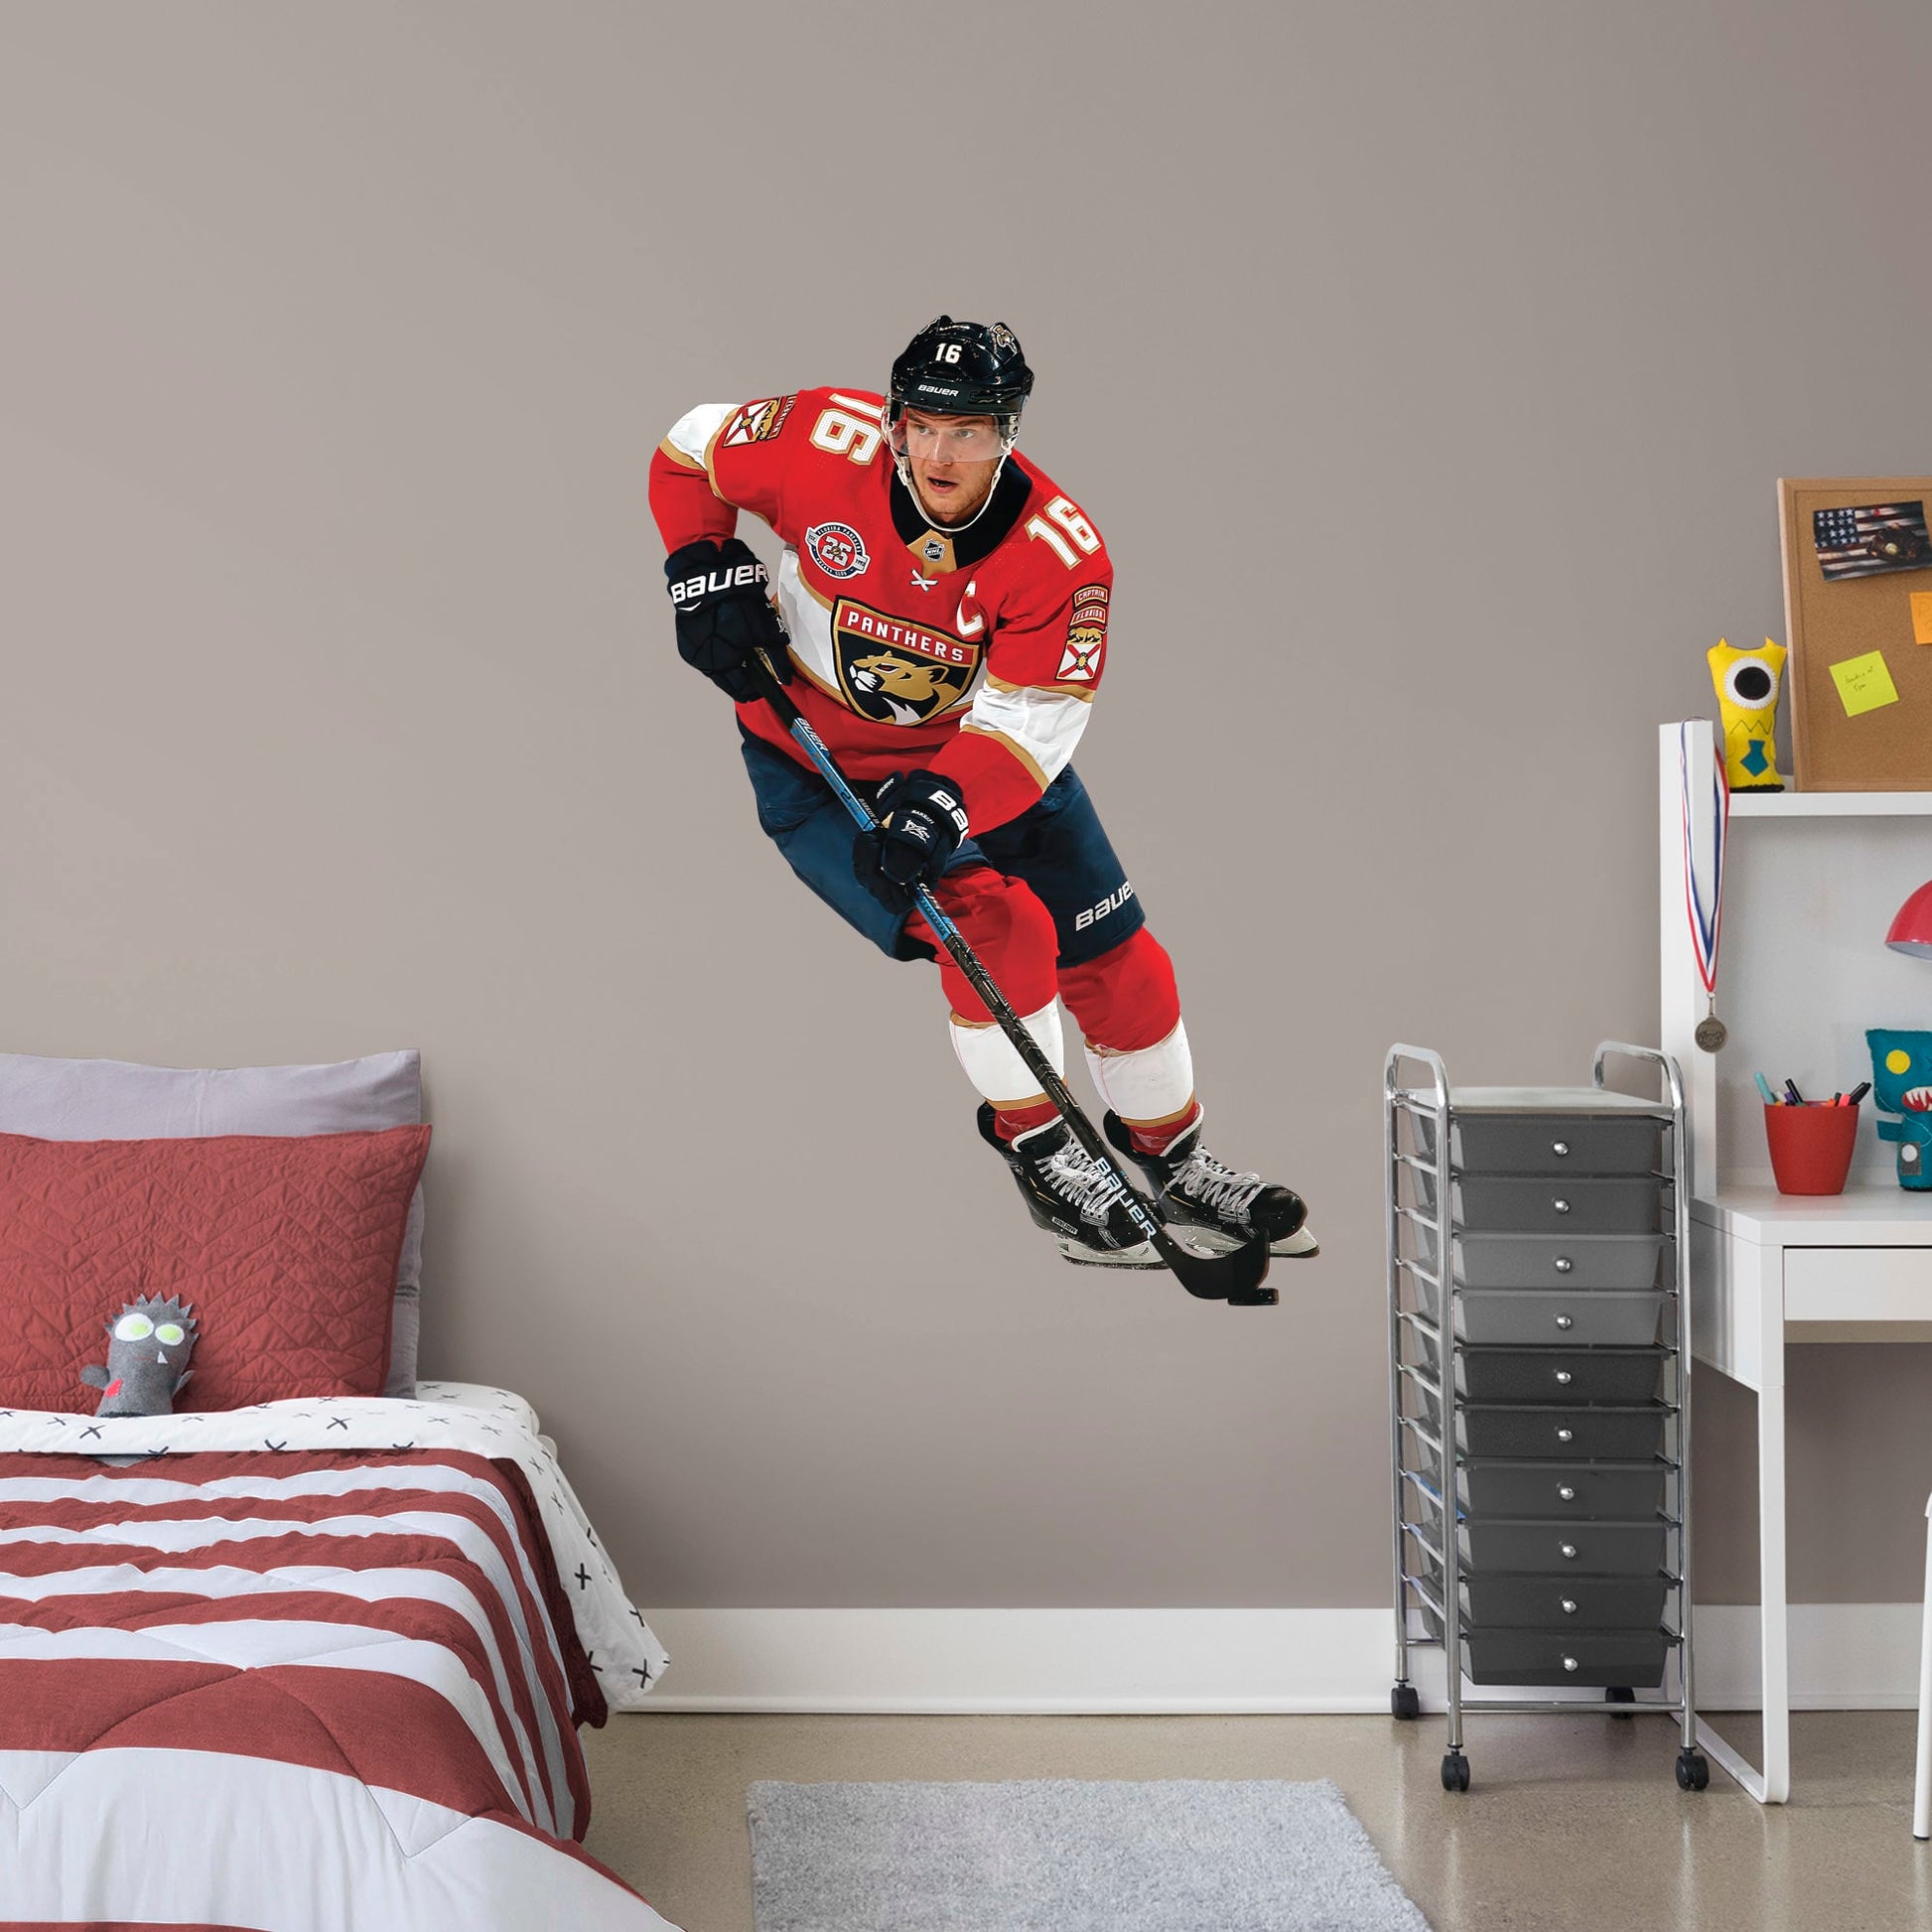 X-Large Athlete + 2 Team Decals (25"W x 37"H) NHL fans and Panthers fanatics alike love Aleksander Barkov, the clutch captain from Florida, and now you can bring his skill to life in your own home! Seen here in action on the ice, this durable and bold wall decal will make the perfect addition to your bedroom, office, fan room, or any spot in your house! 